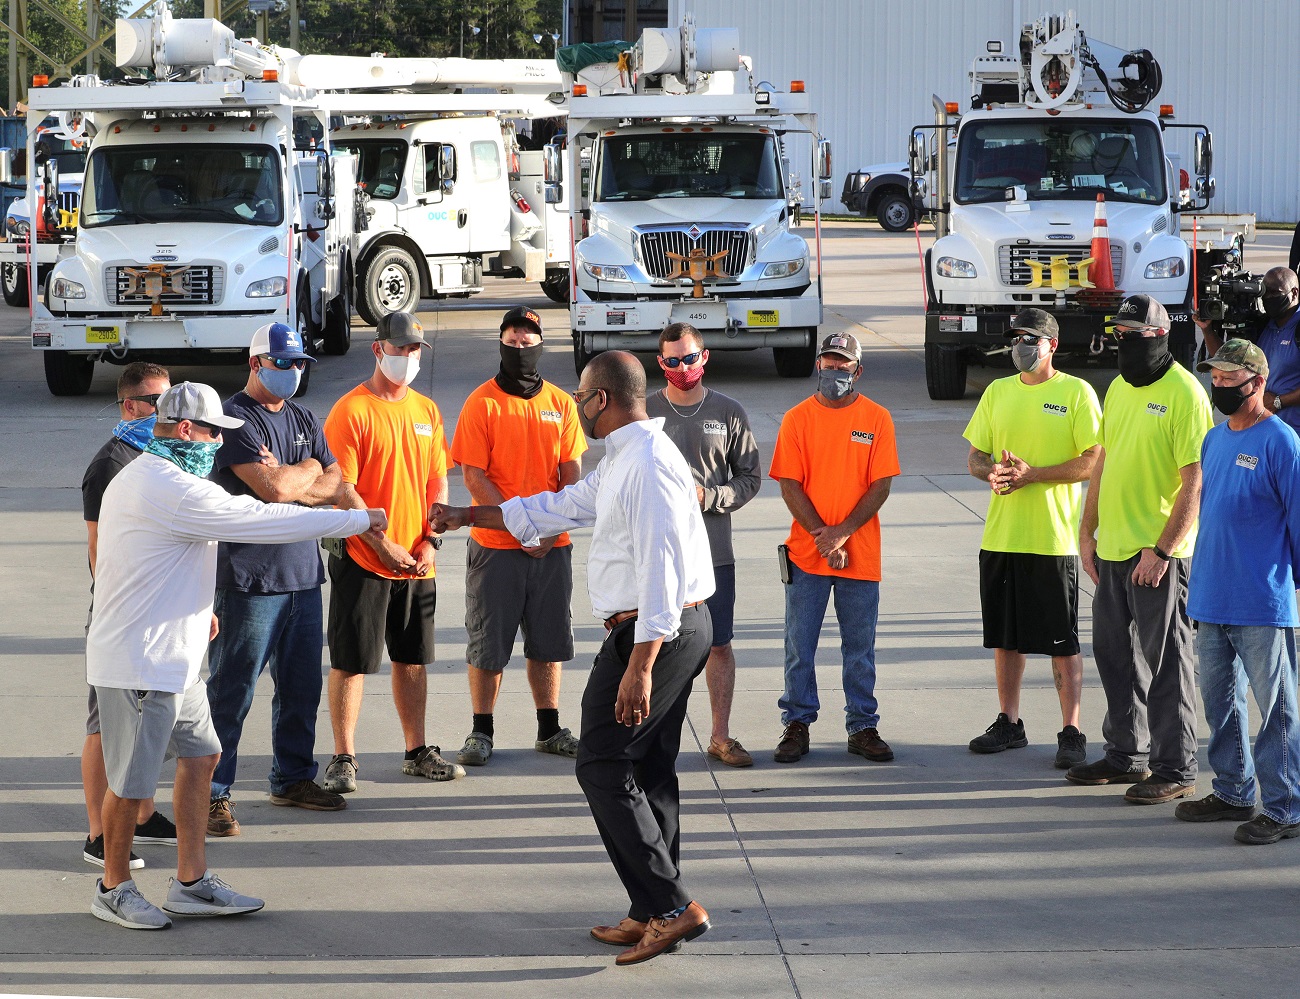 Orlando Utilities Commission vice president LeMoyne Adams, center, thanks lineworkers during a meeting before their departure from OUC&#039;s Pershing Operations Center in Orlando, Fla. for Lafayette, La., Thursday, Aug. 27, 2020. A dozen OUC workers volunteered to assist with power restoration efforts in the wake of the devastation from Hurricane Laura that struck the Louisiana coastline Thursday morning. The lineworkers will join up with other municipal utilities from across the U.S. as a part of a coordinated mutual aid response to the category 4 hurricane. (Photo by Joe Burbank/Orlando Sentinel/TNS/Sipa USA) No Use UK. No Use Germany.